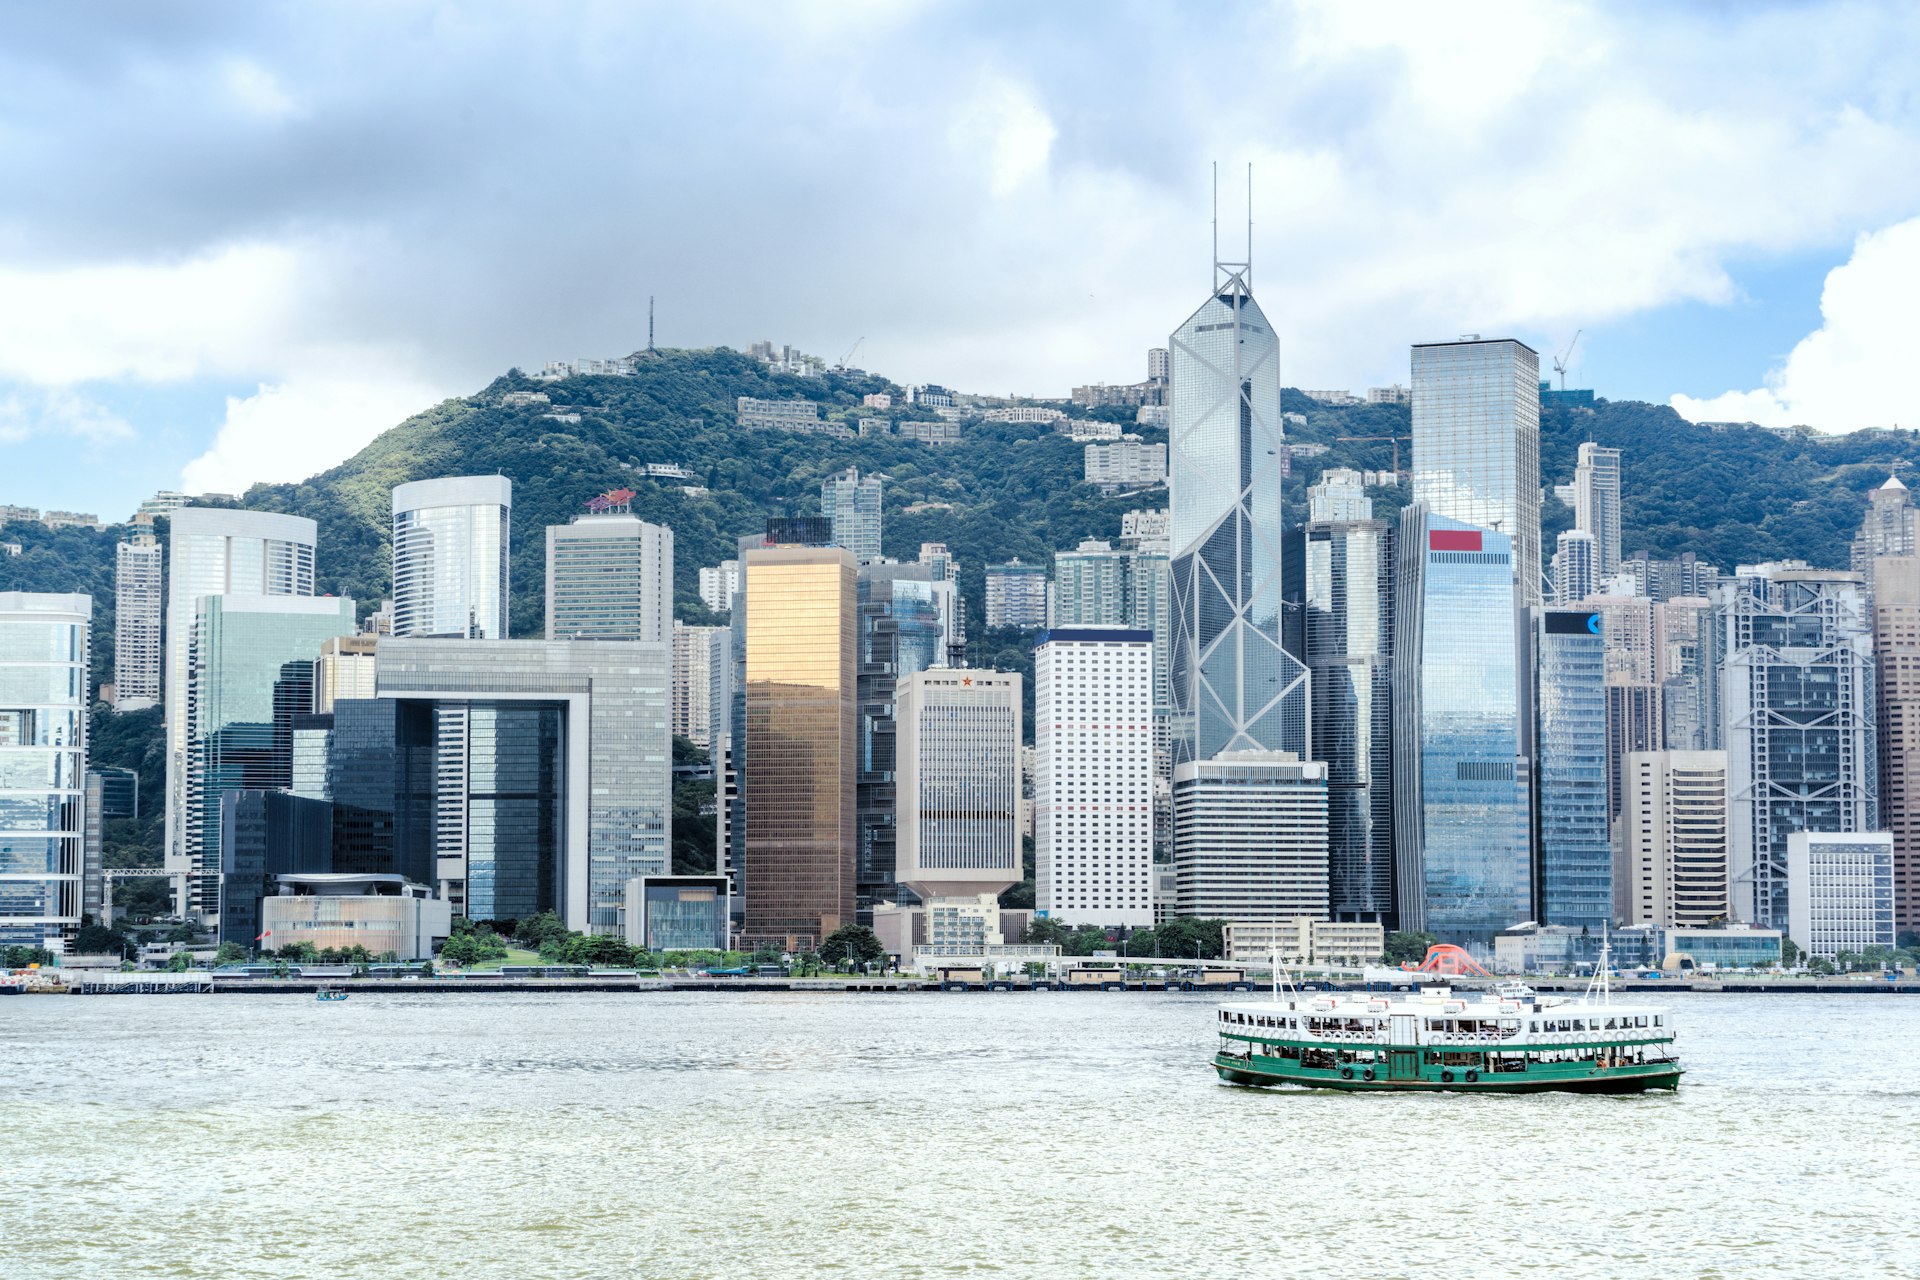 A Star Ferry crosses the waters of Victoria Harbour in Hong Kong with skyscrapers in the background 